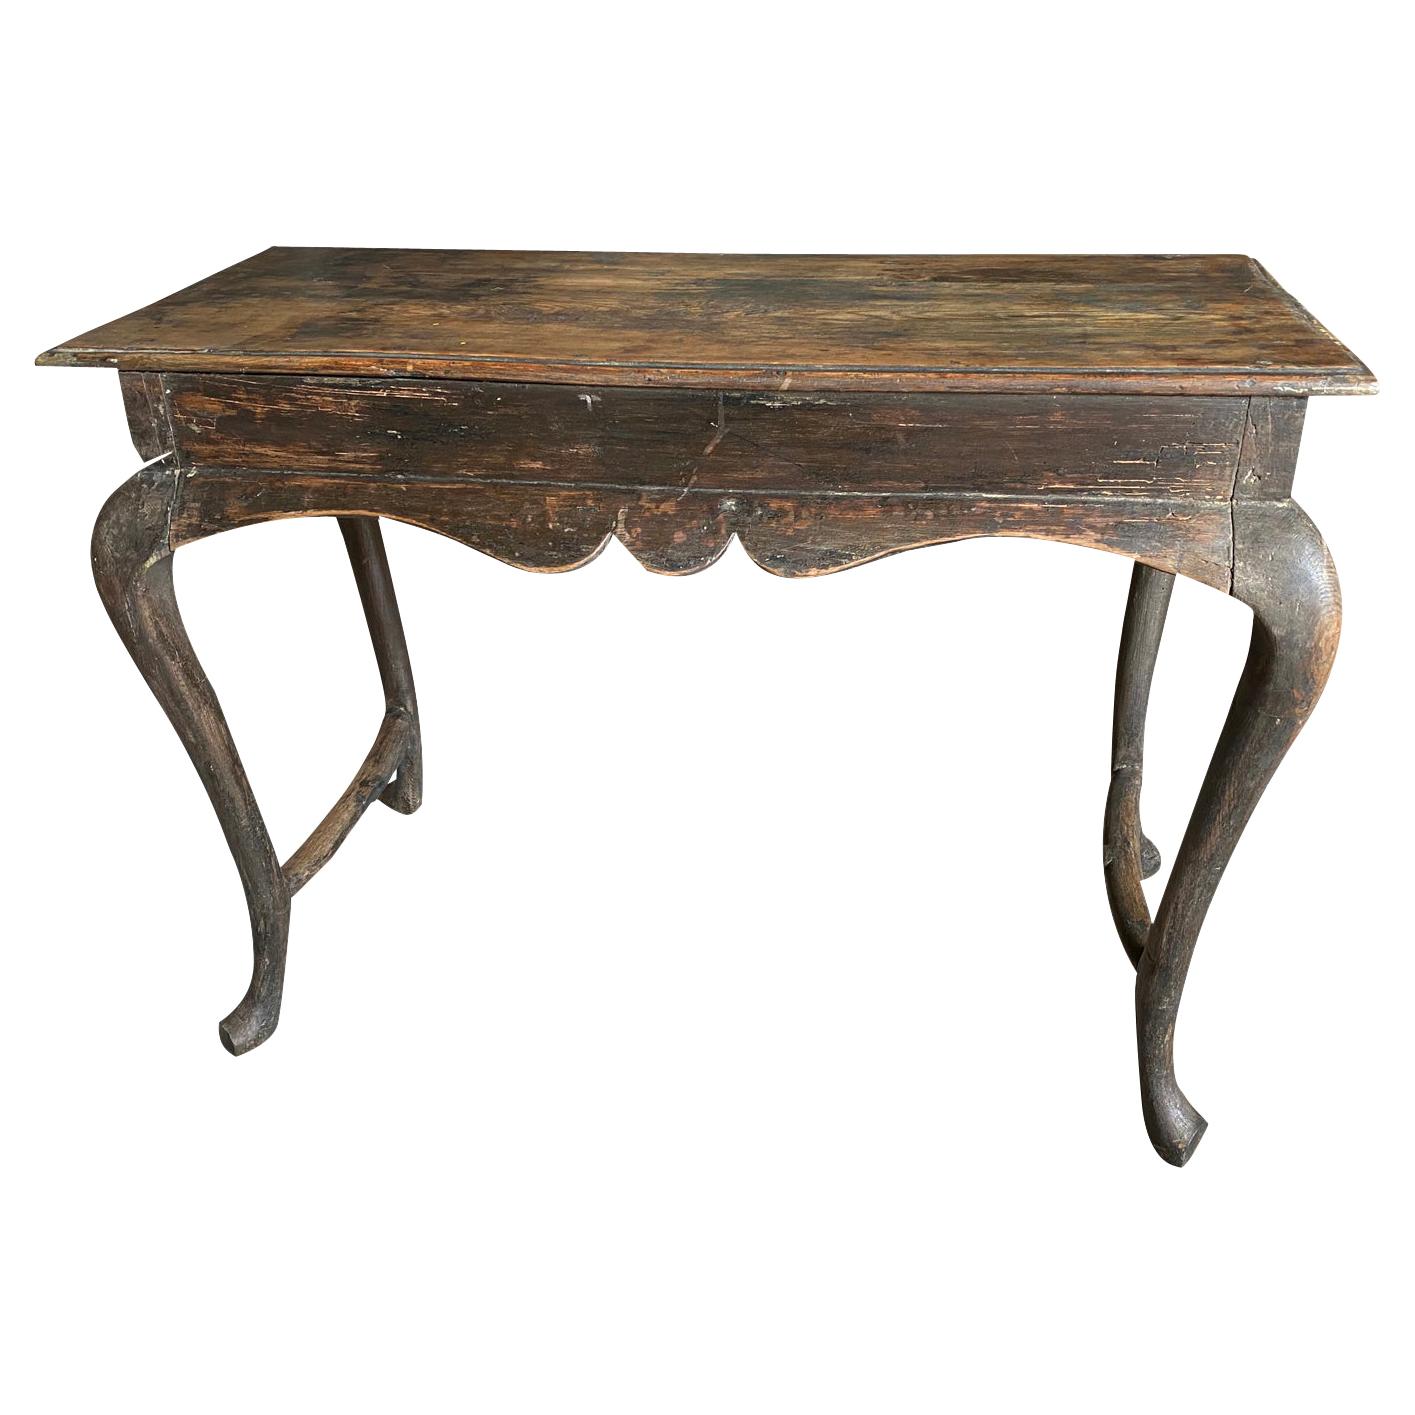 A very lovely 19th century console table from the Catalan region of Spain. Beautifully constructed from painted wood with a sculpted apron and gentle cabriole legs.